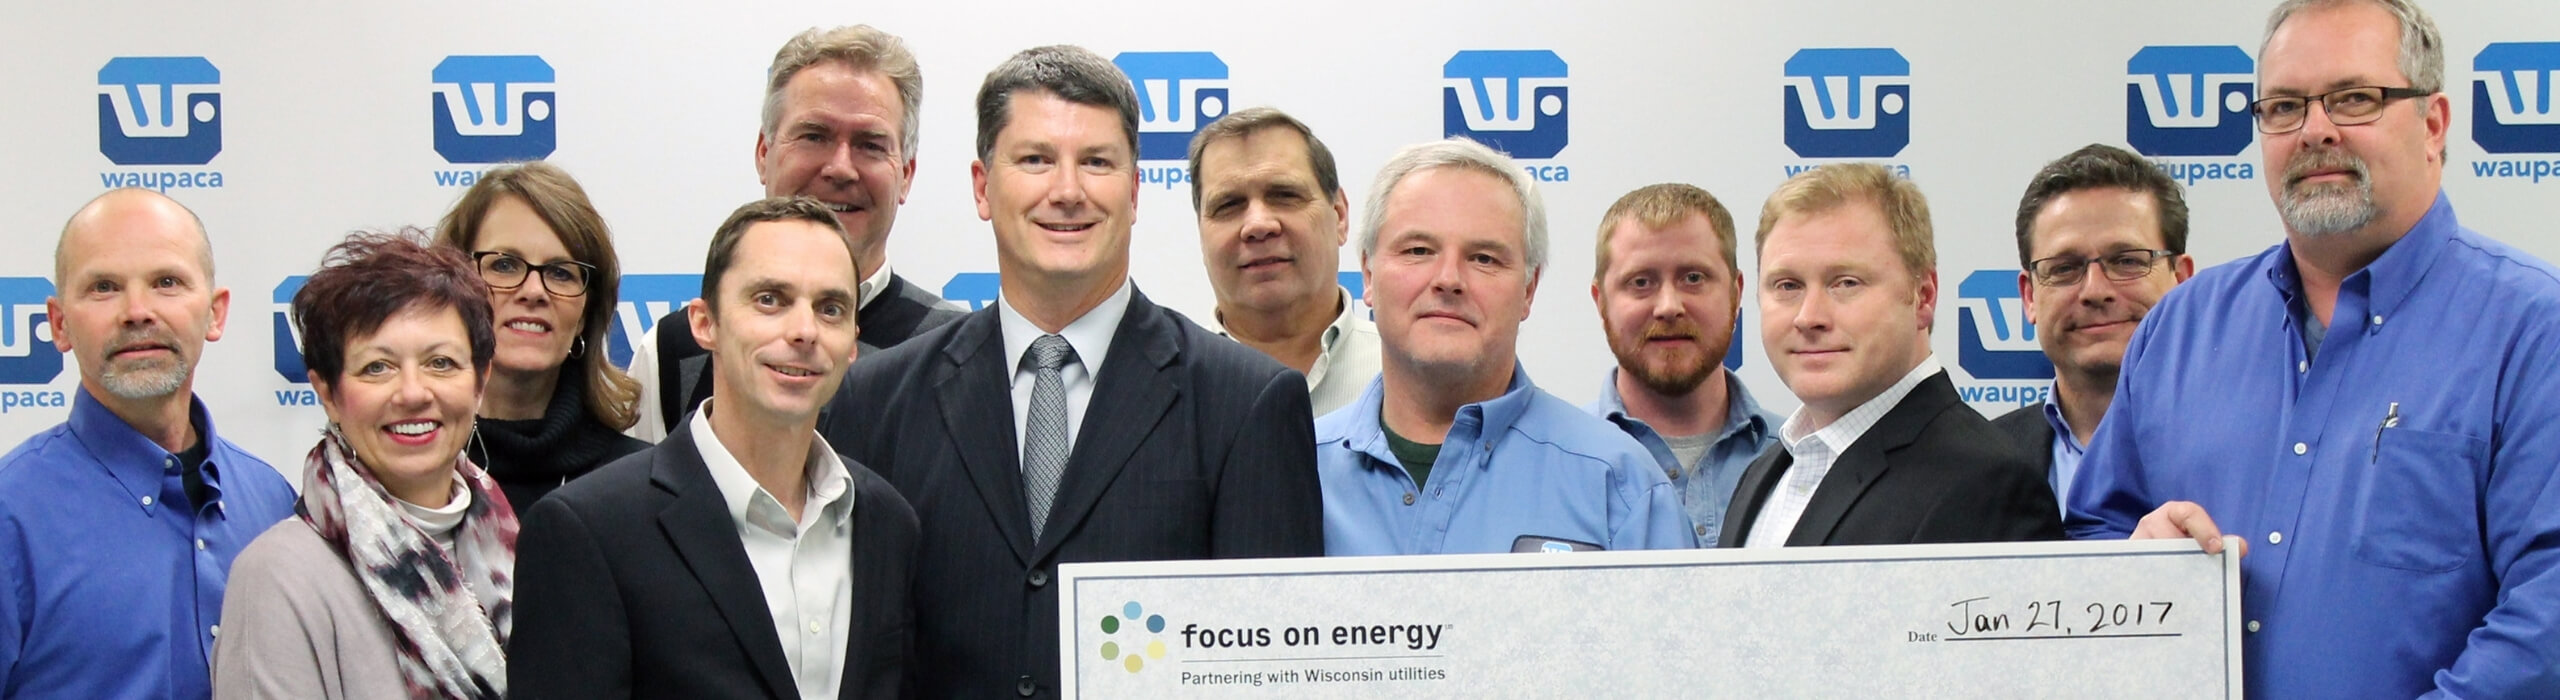 Waupaca Foundry Achieves ISO 50001 Energy Management Certification